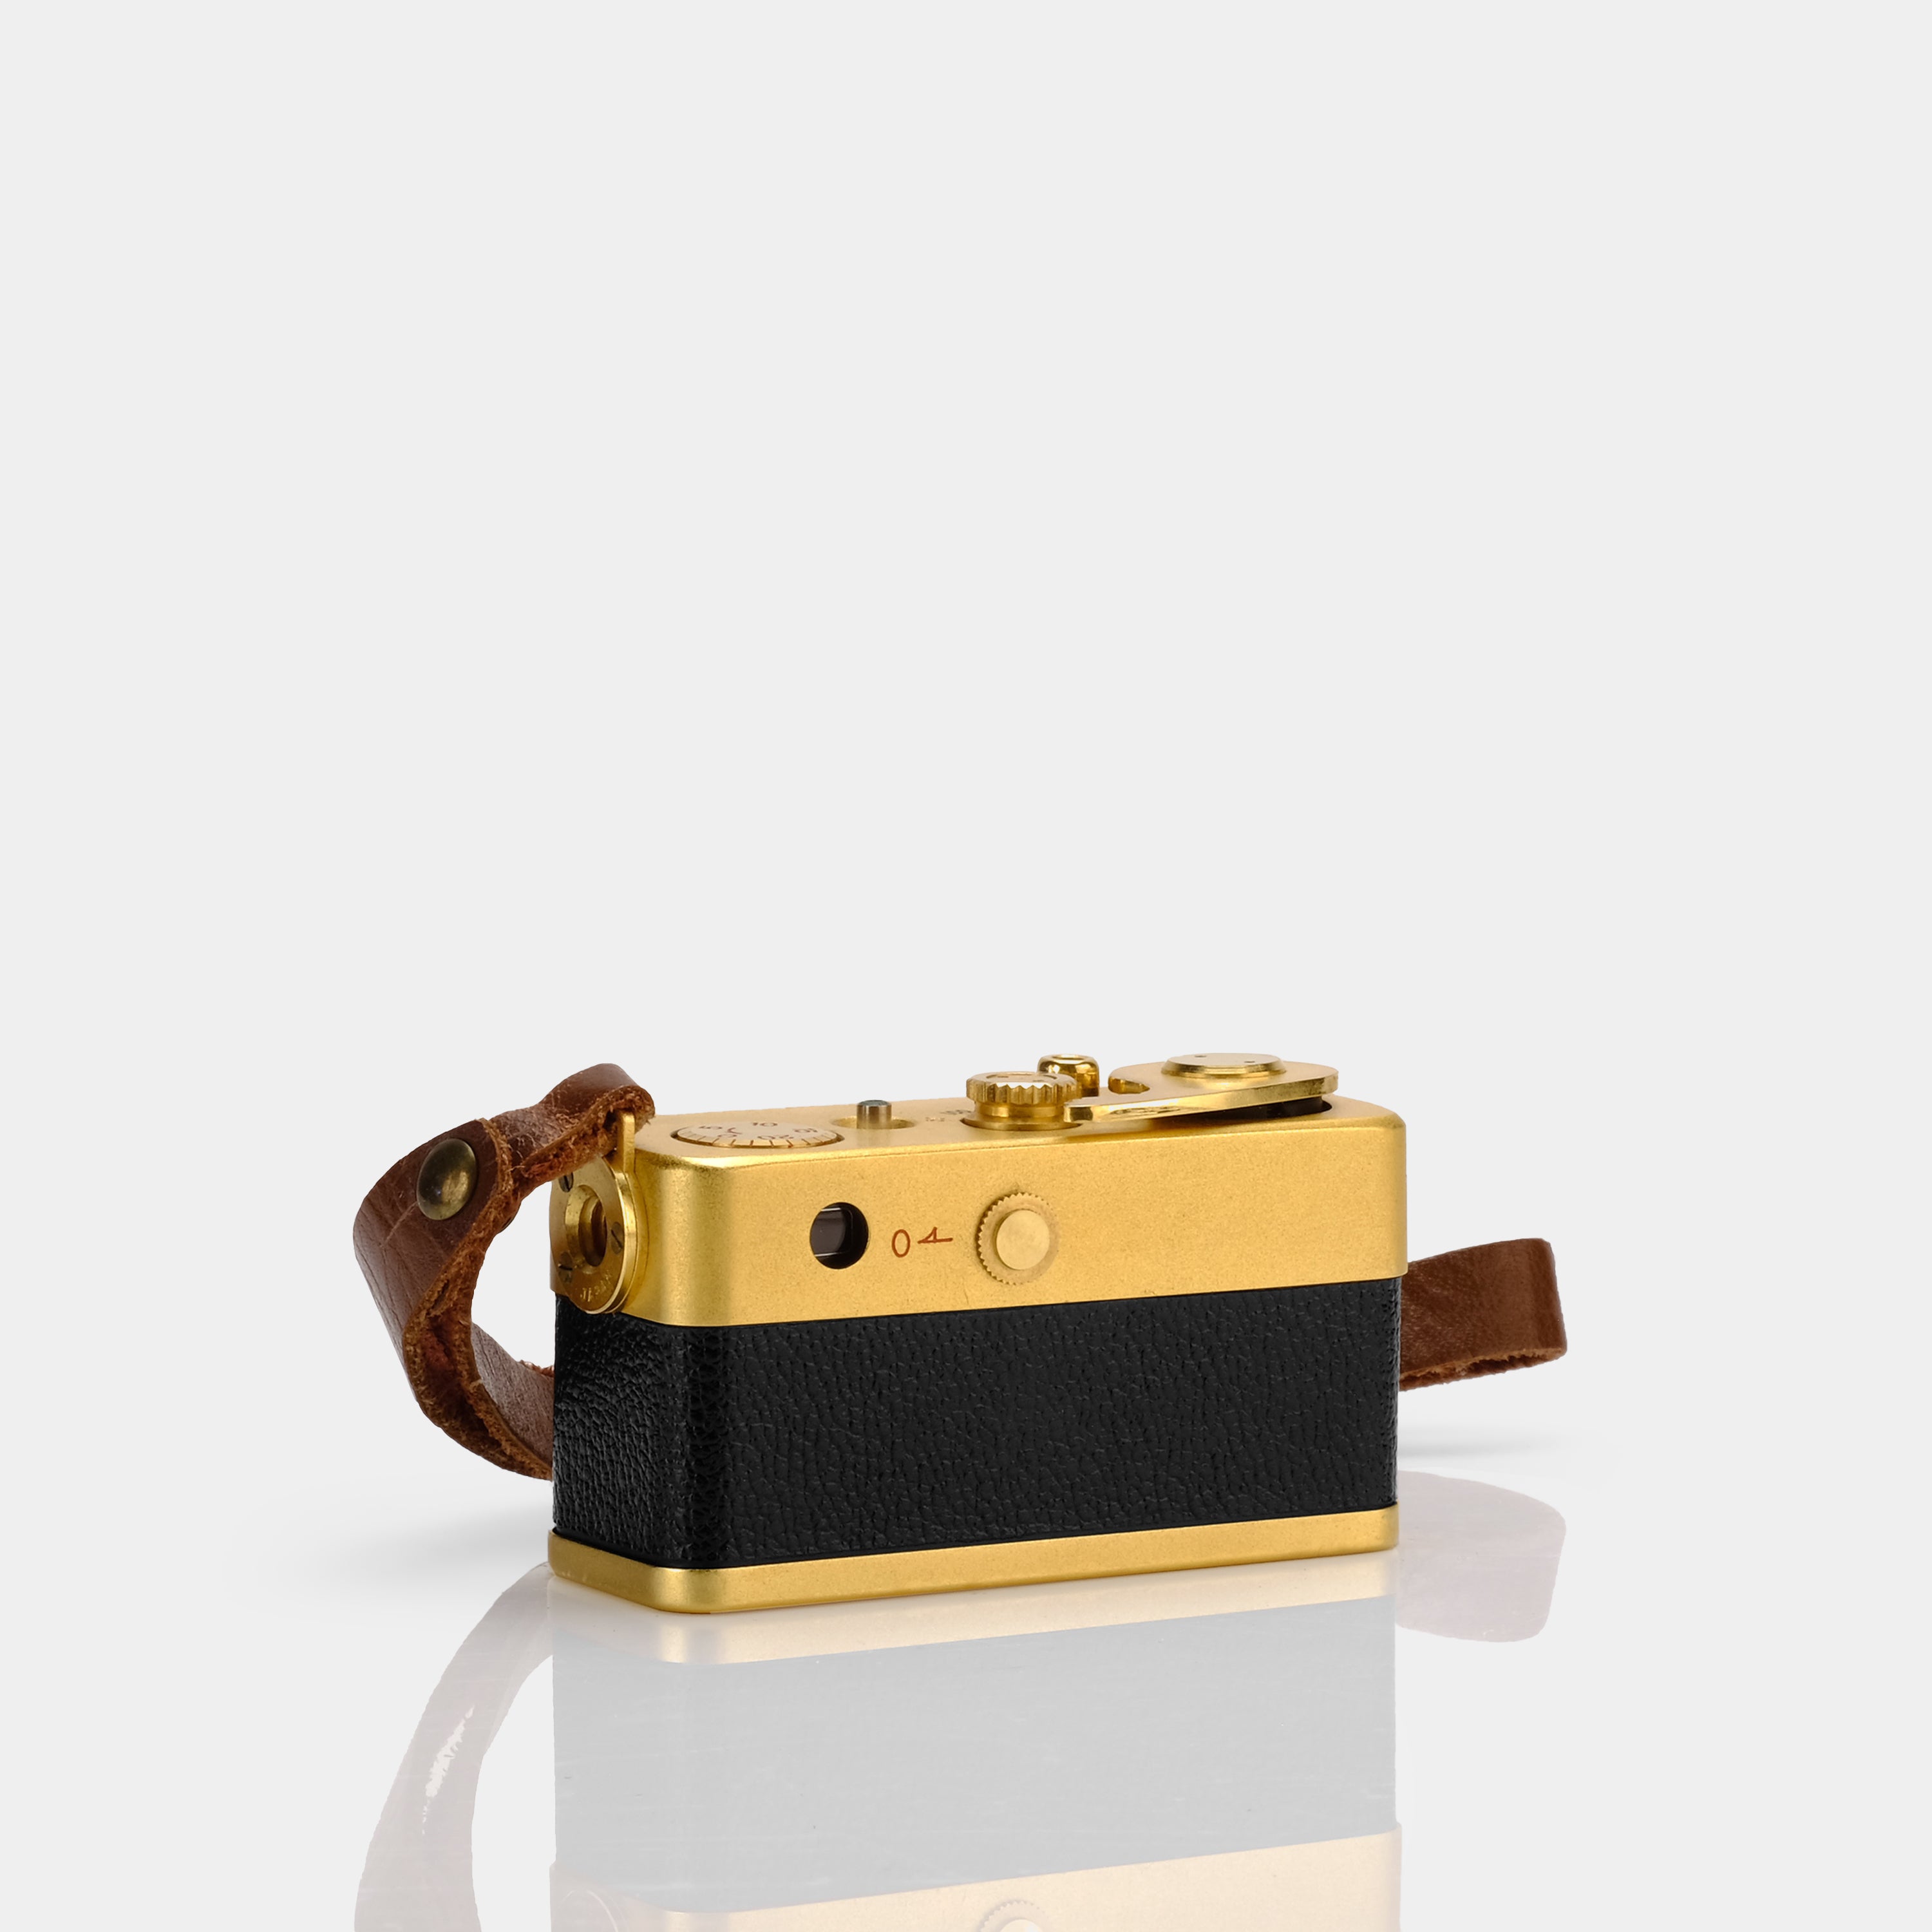 Golden Ricoh 16 Subminiature Gold-plated 16mm Film Camera